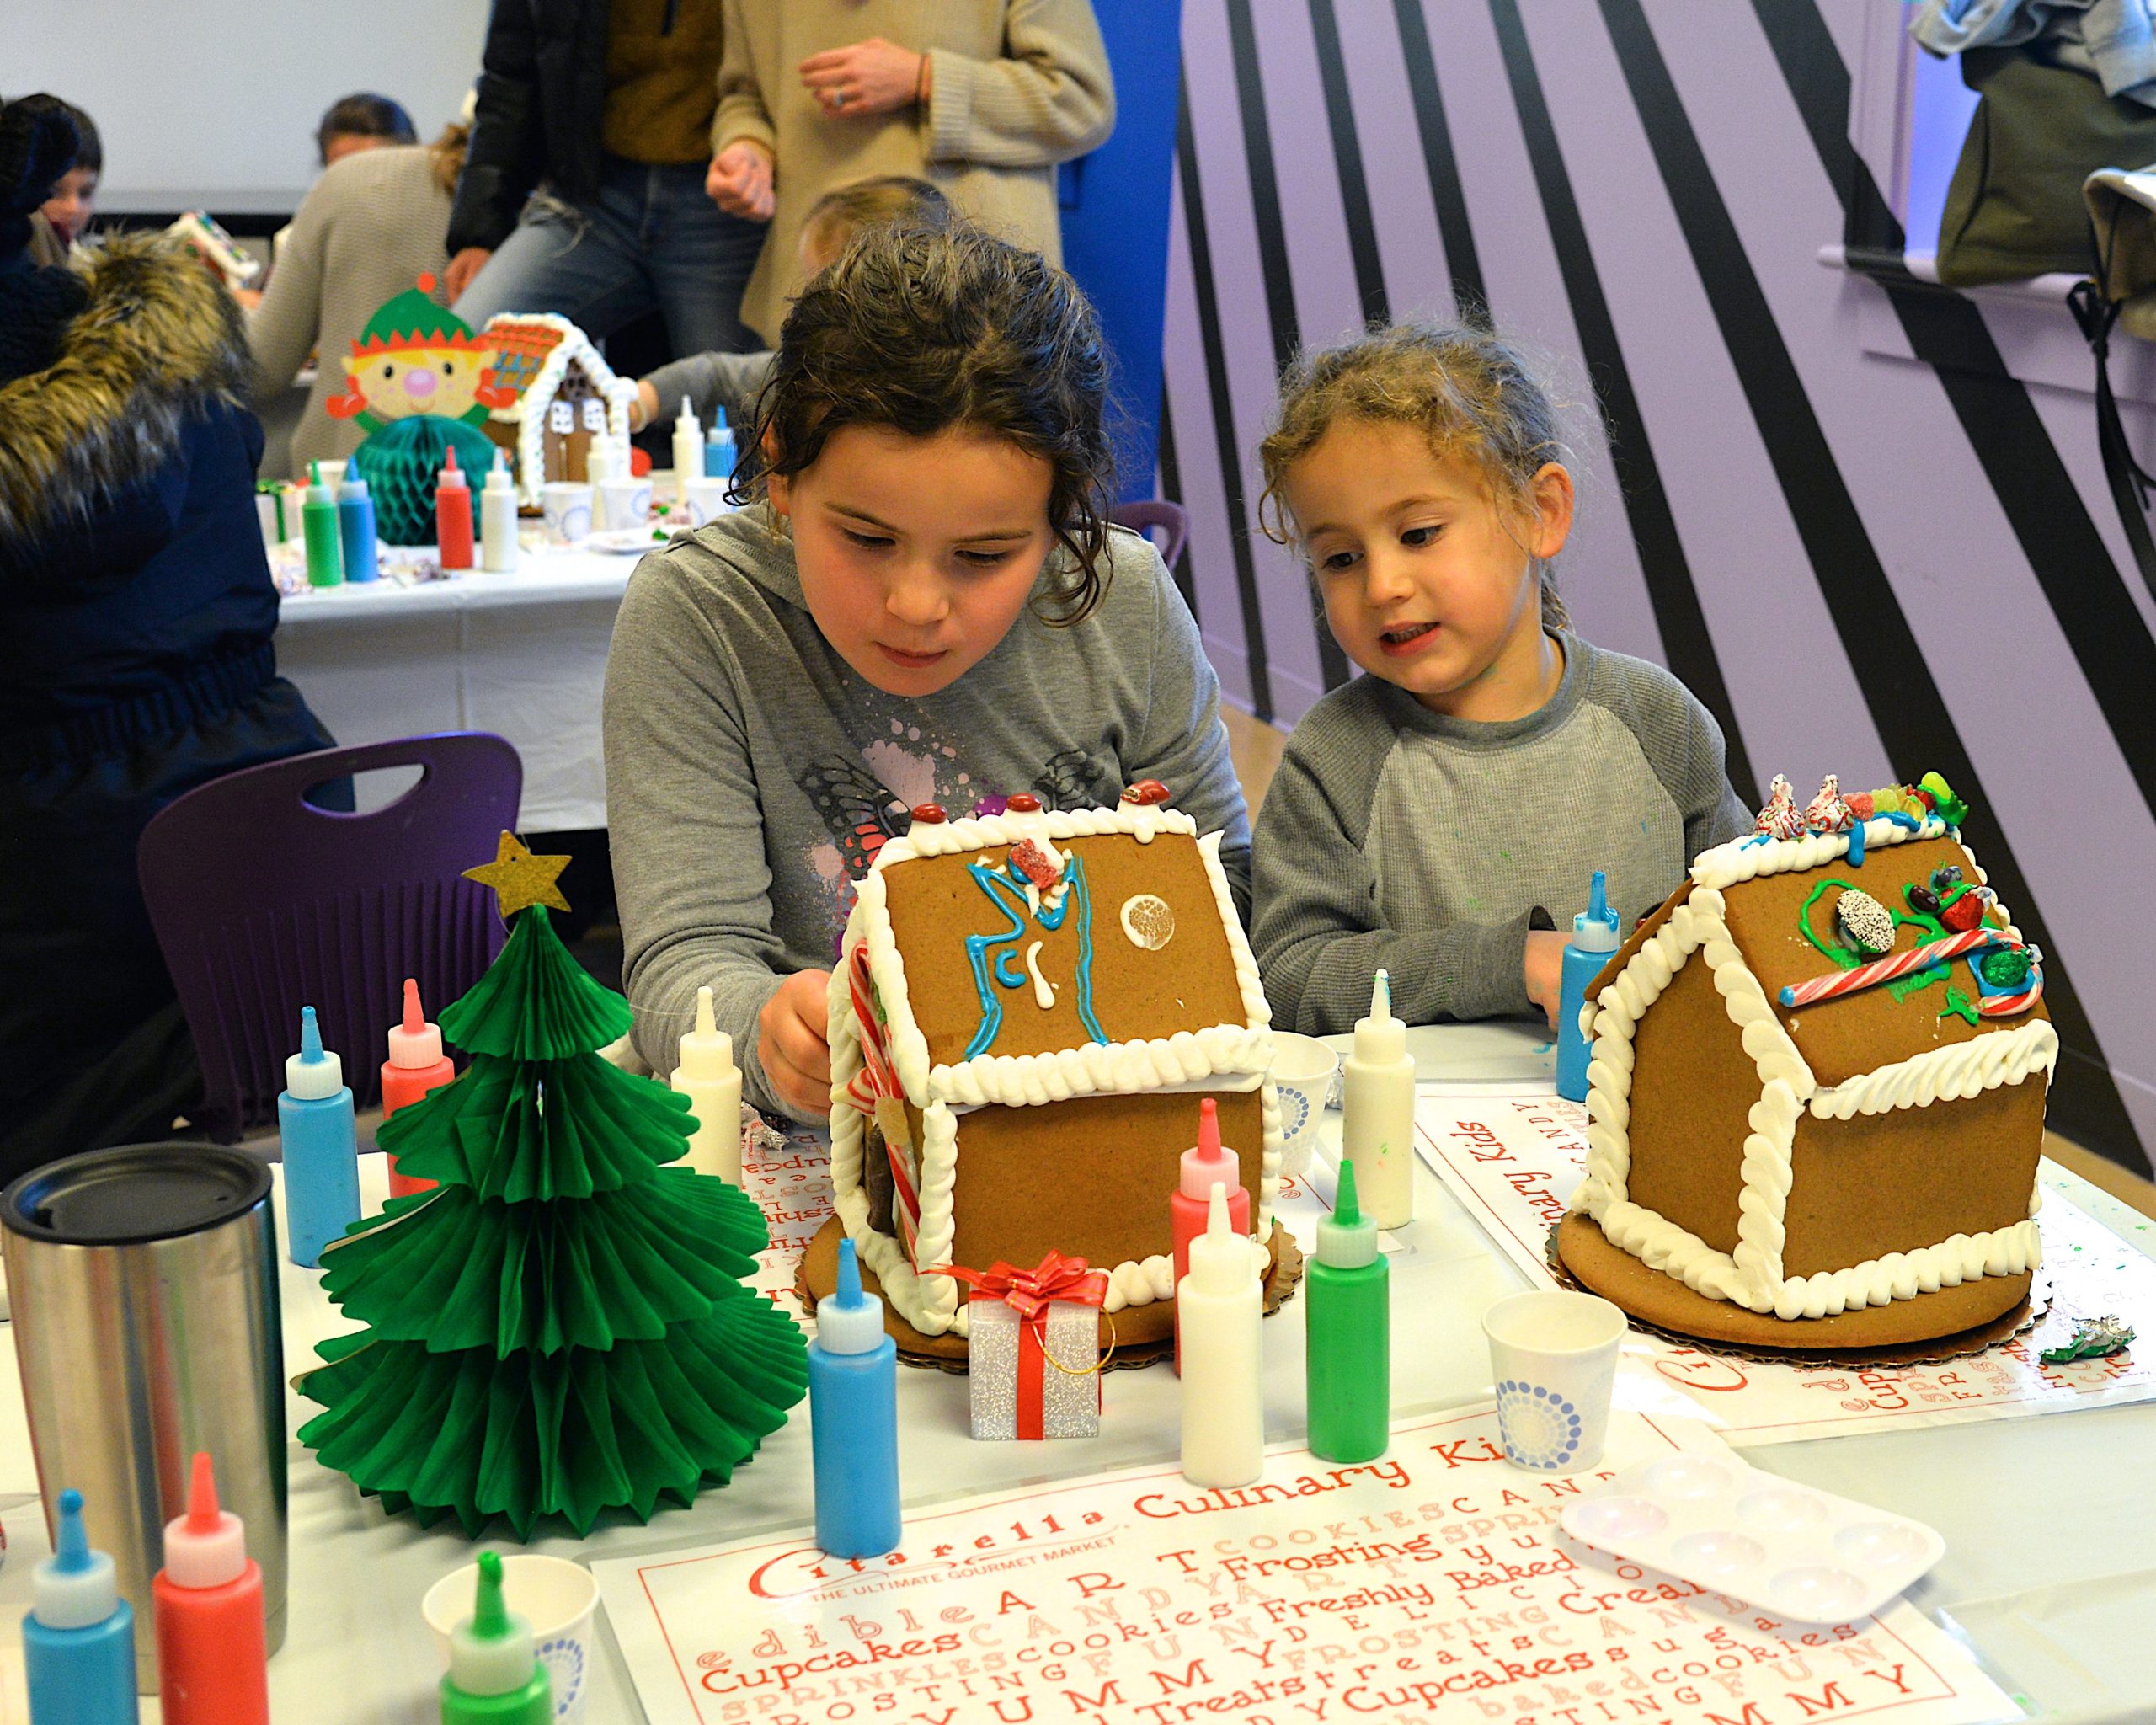 Guild Hall offered an opportunity to get in the holiday spirit by making gingerbread houses on Saturday. Wesley and Louie Bull intent on their work. KYRIL BROMLEY 